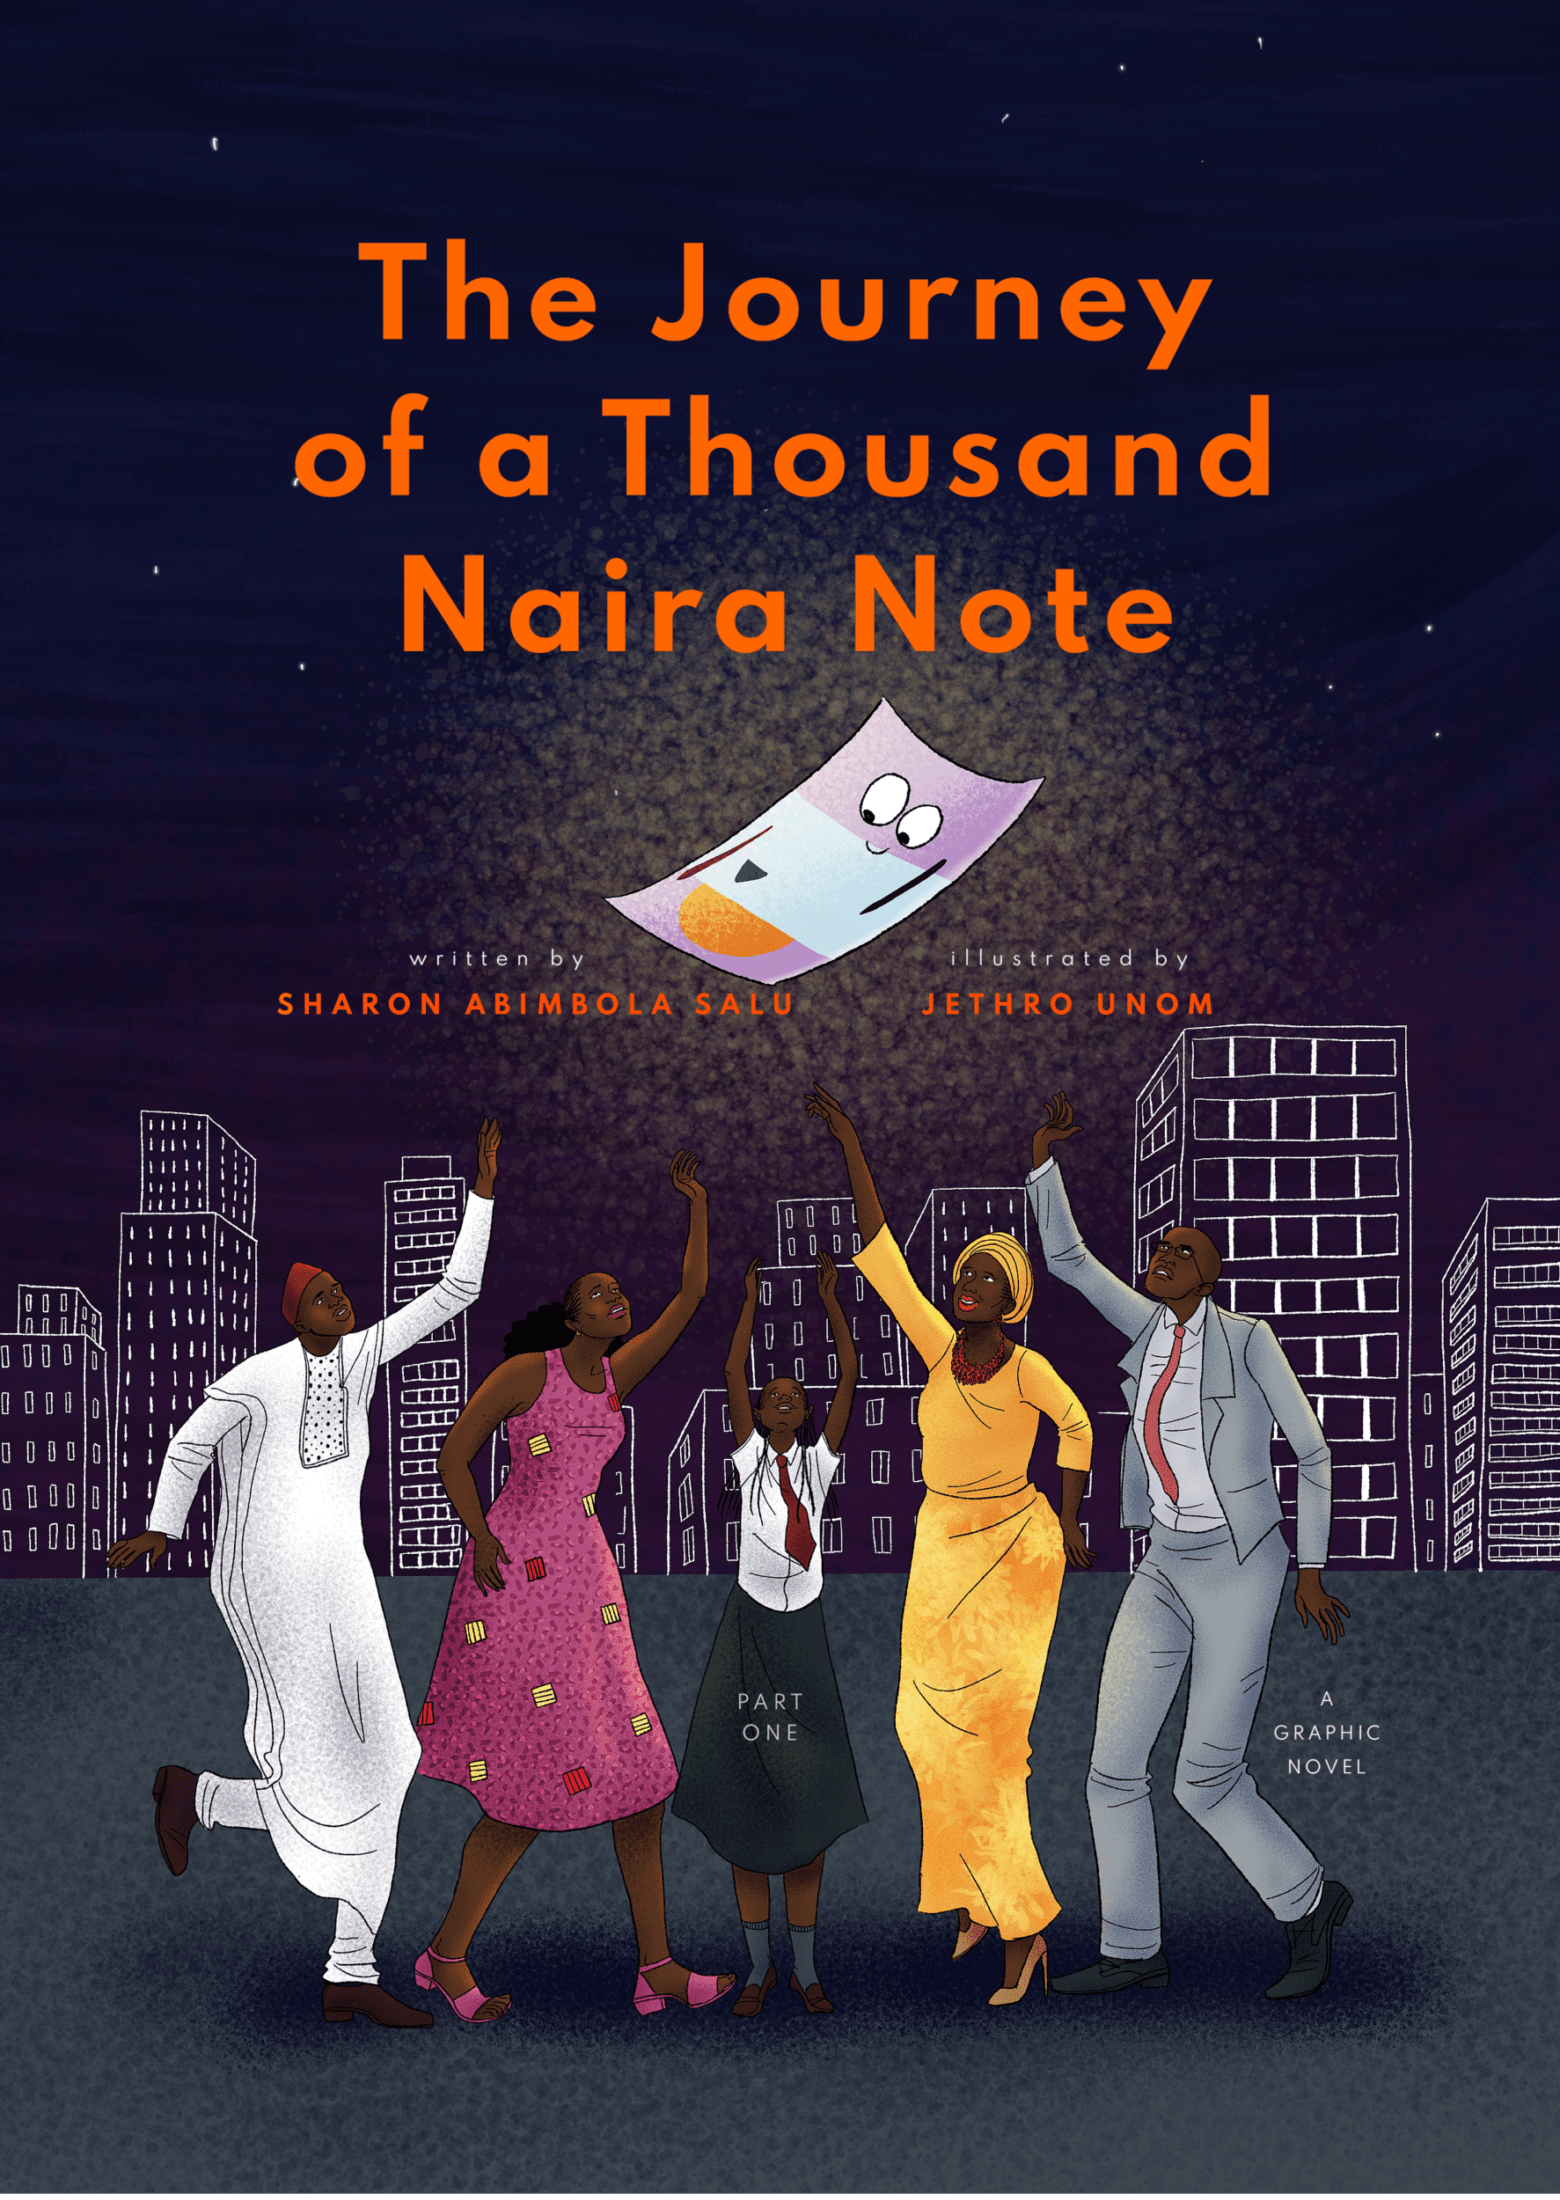 Part 1 - eBook Cover - The Journey of a Thousand Naira Note Nigerian Graphic Novel